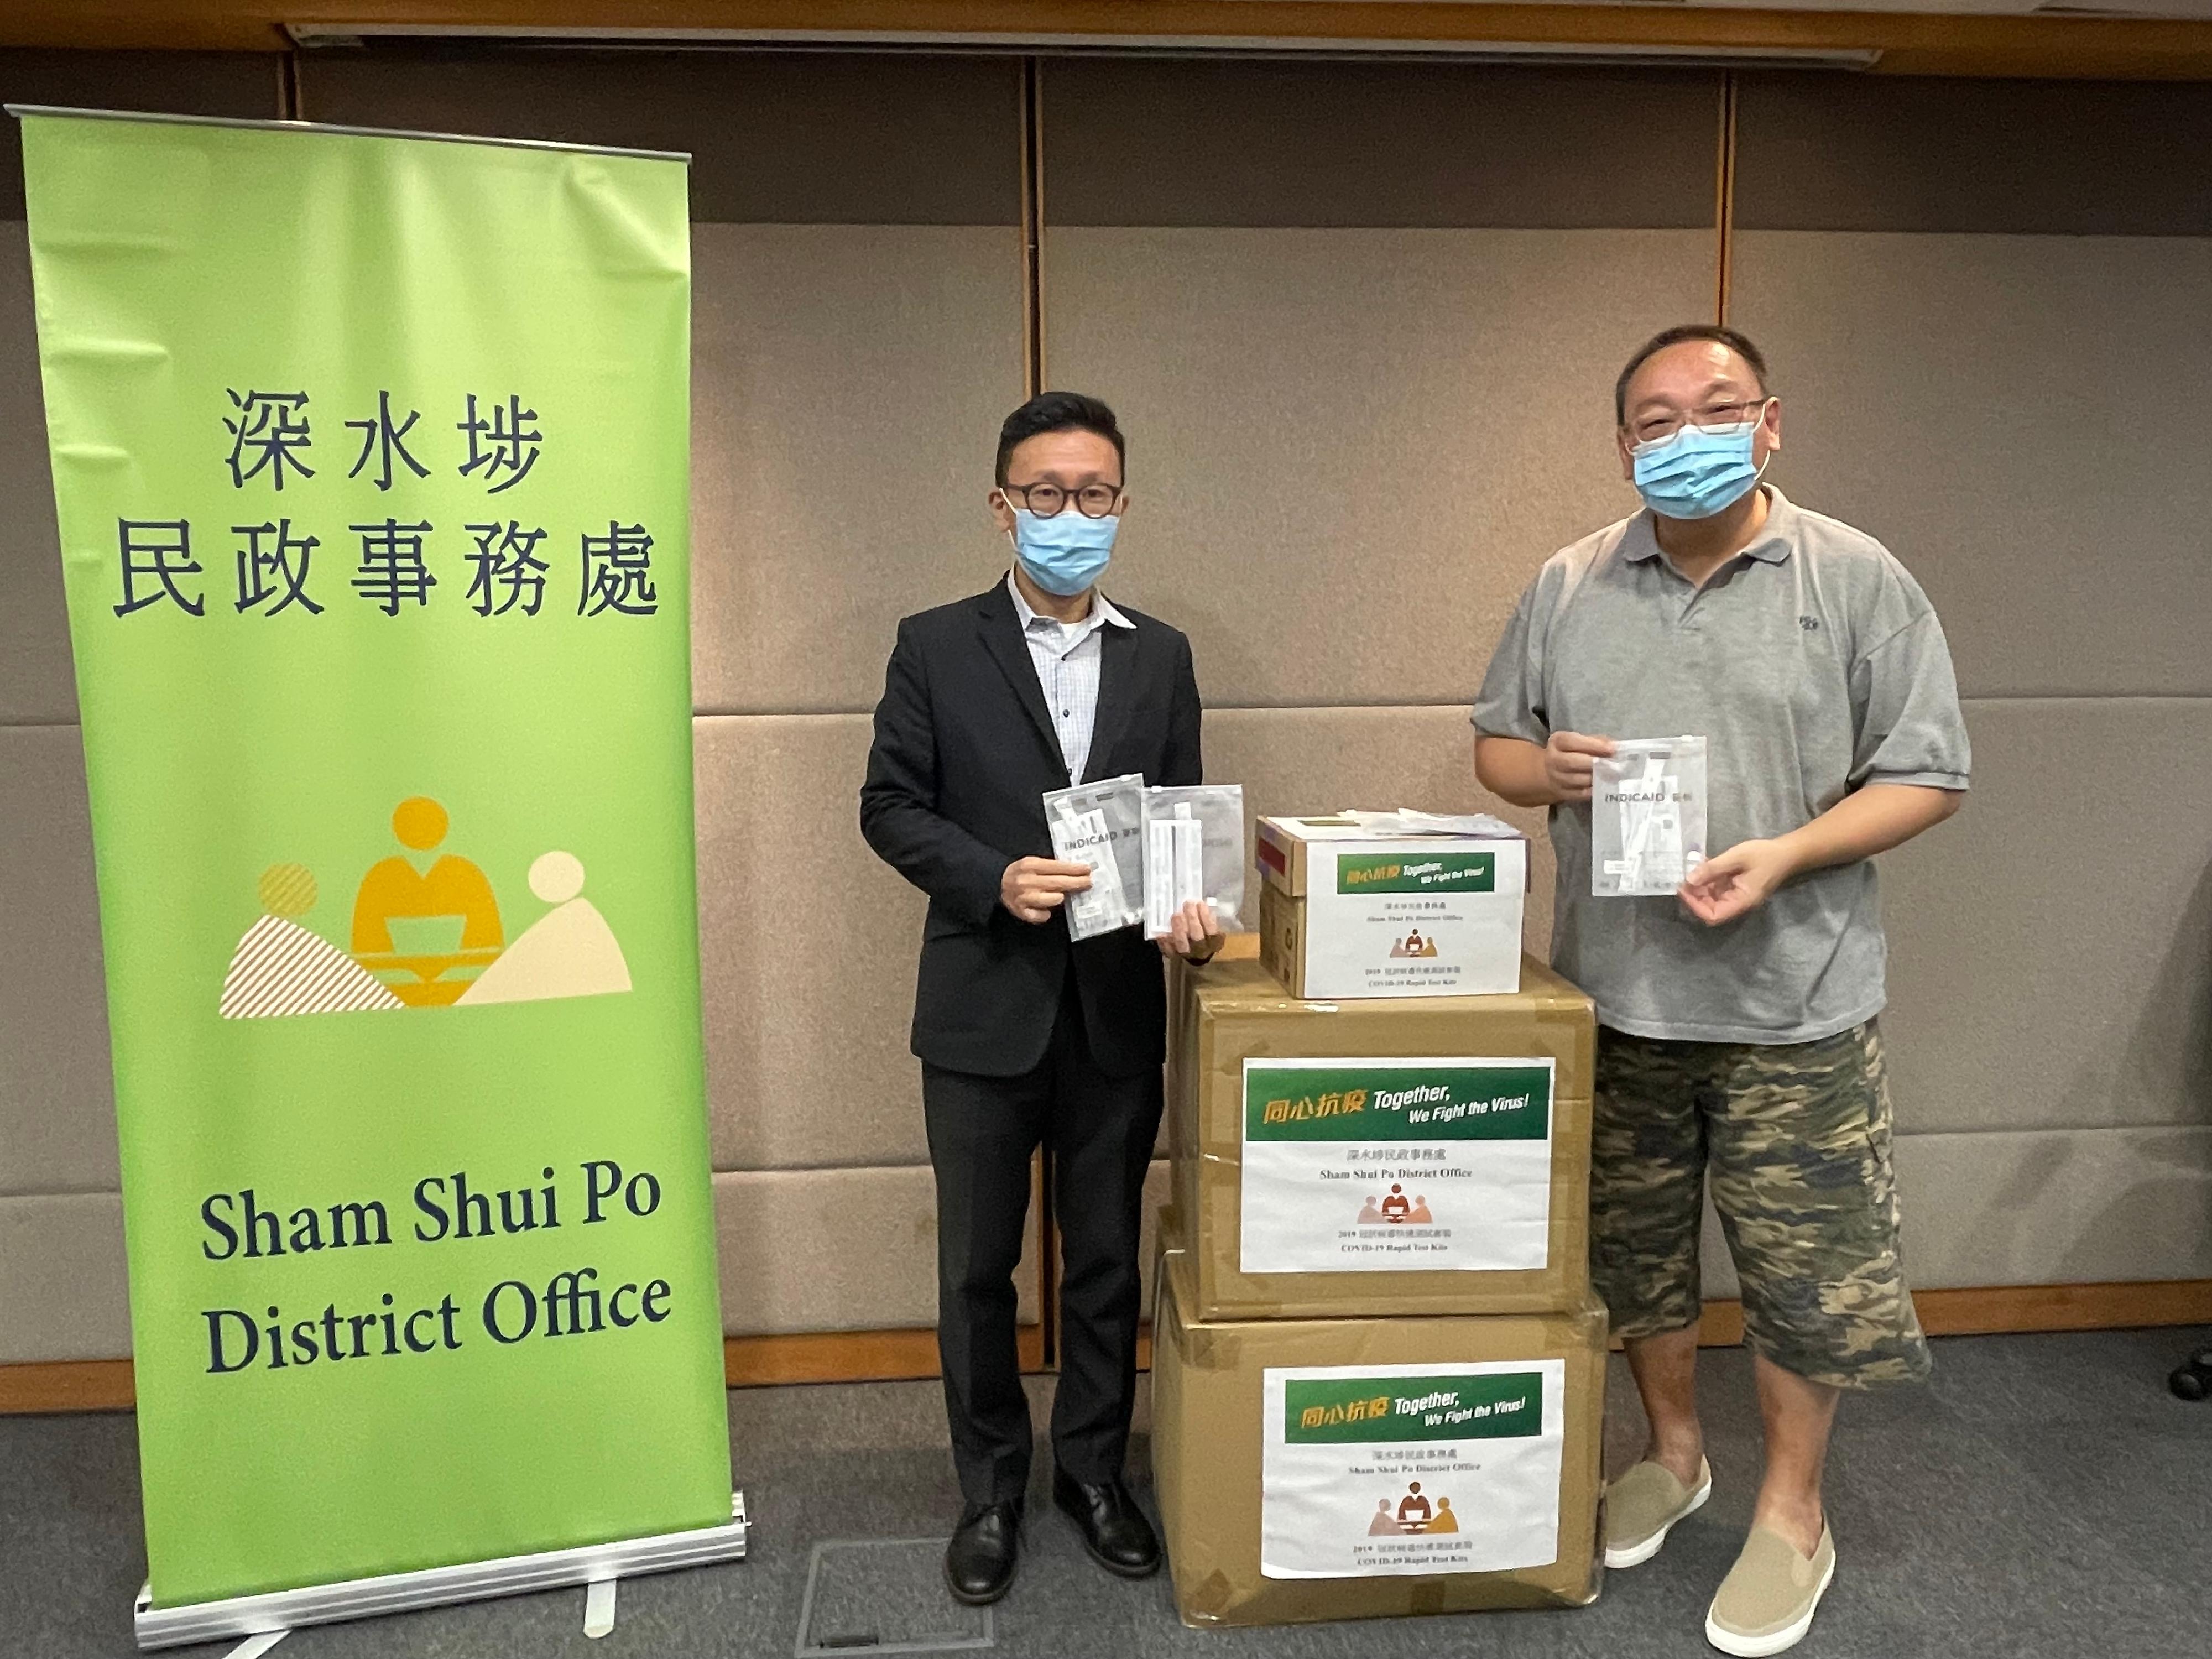 The Sham Shui Po District Office today (July 28) distributed COVID-19 rapid test kits to households, cleansing workers and property management staff living and working in Maryland Court for voluntary testing through the owners' corporation.